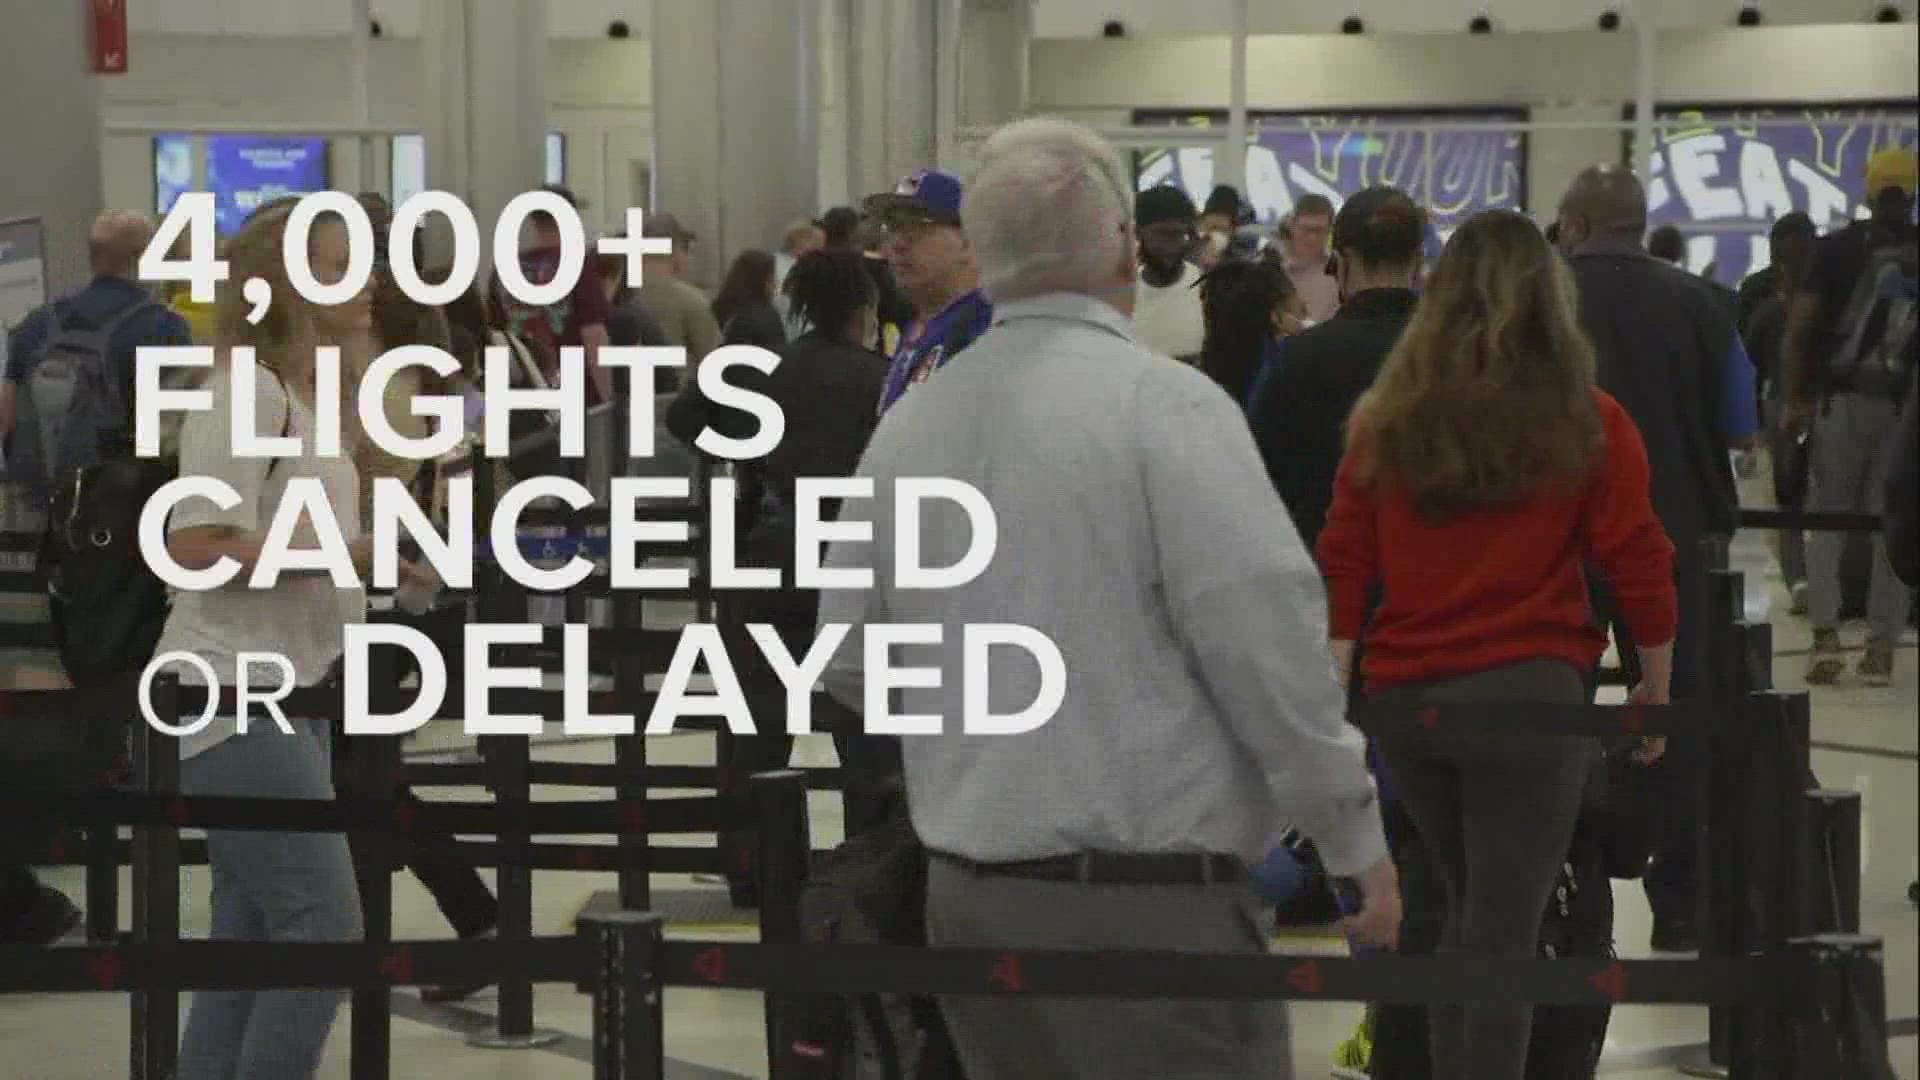 On Sunday alone, more than 4,200 flights were delayed and 900 flights were canceled across the country, according to FlightAware.